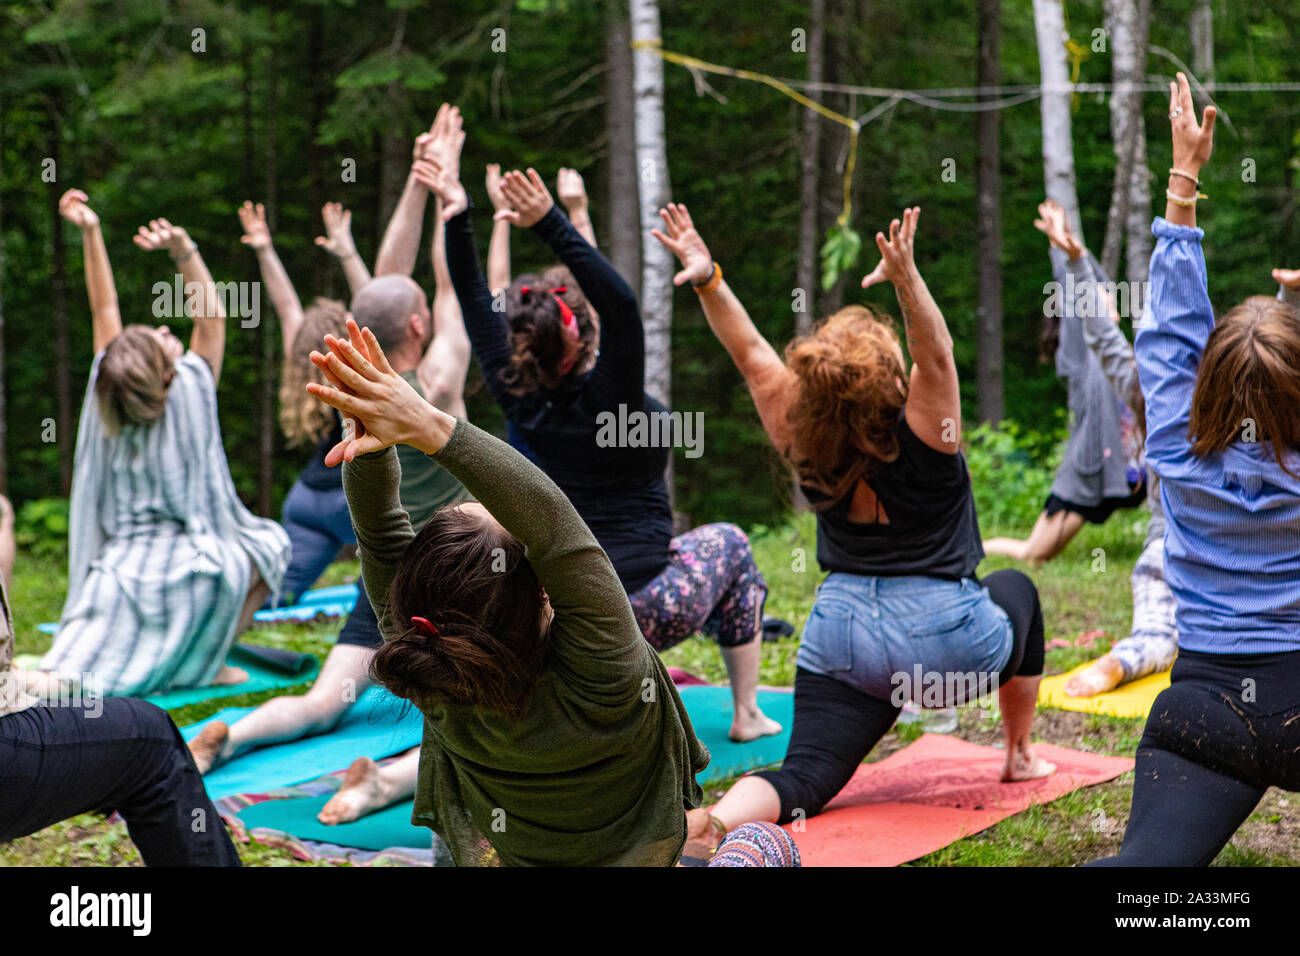 A group of people of all age groups are seen in warrior I pose (virabhadrasana I), during an outdoor yoga session as part of a multicultural celebration. Stock Photo